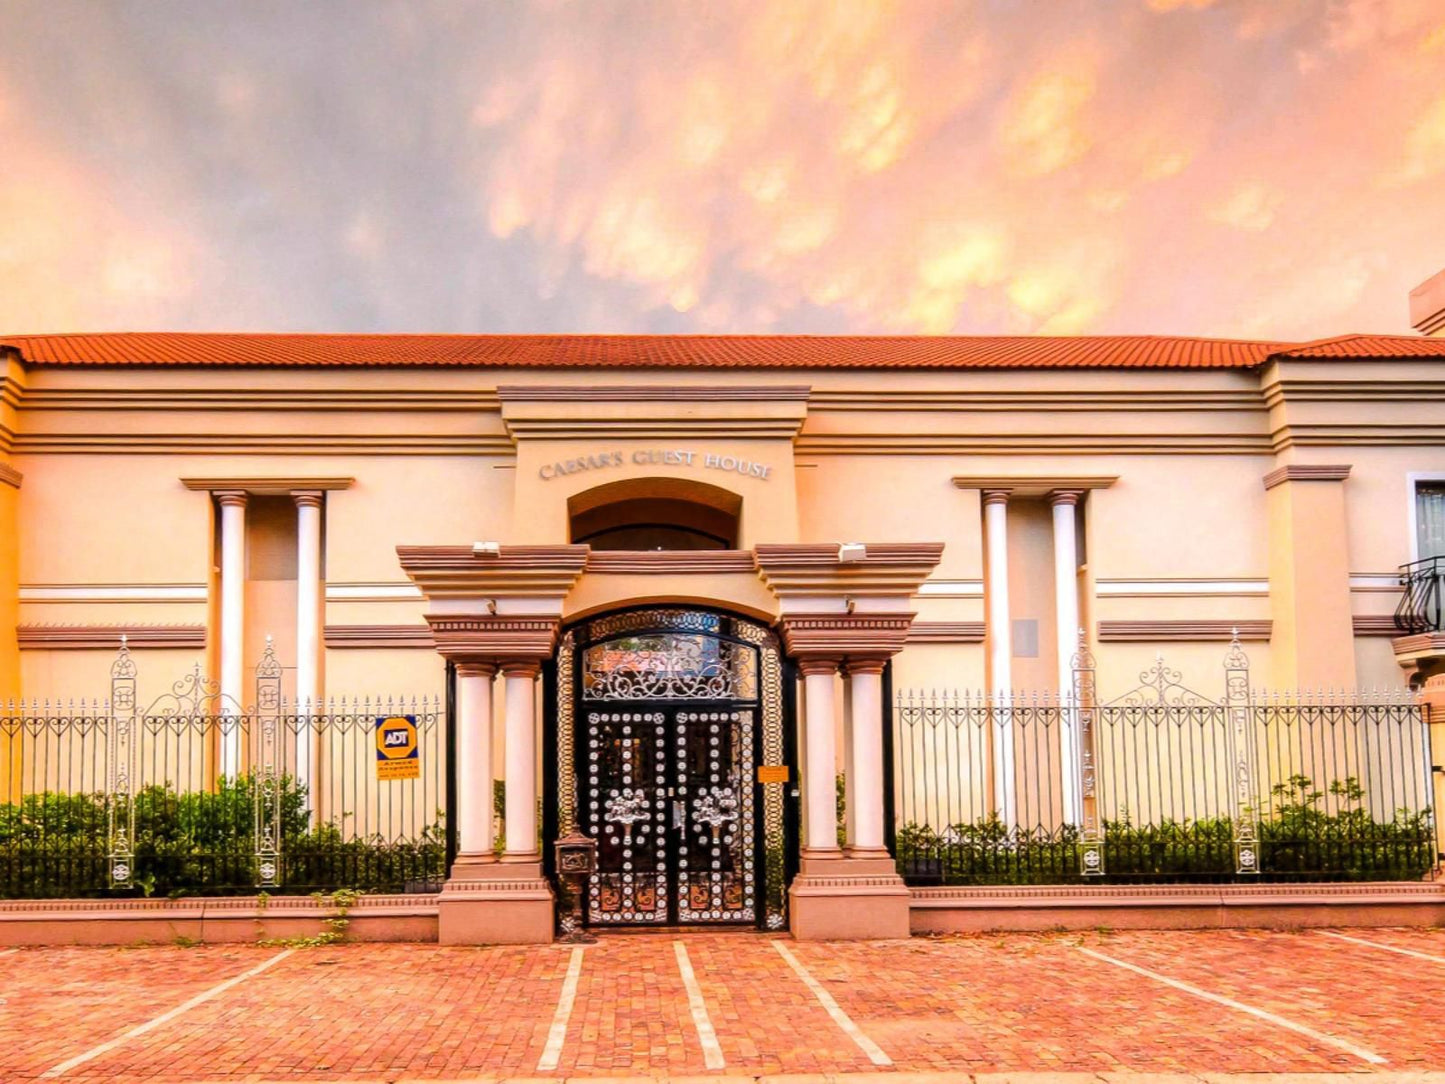 Caesars Guesthouse Sasolburg Free State South Africa Colorful, House, Building, Architecture